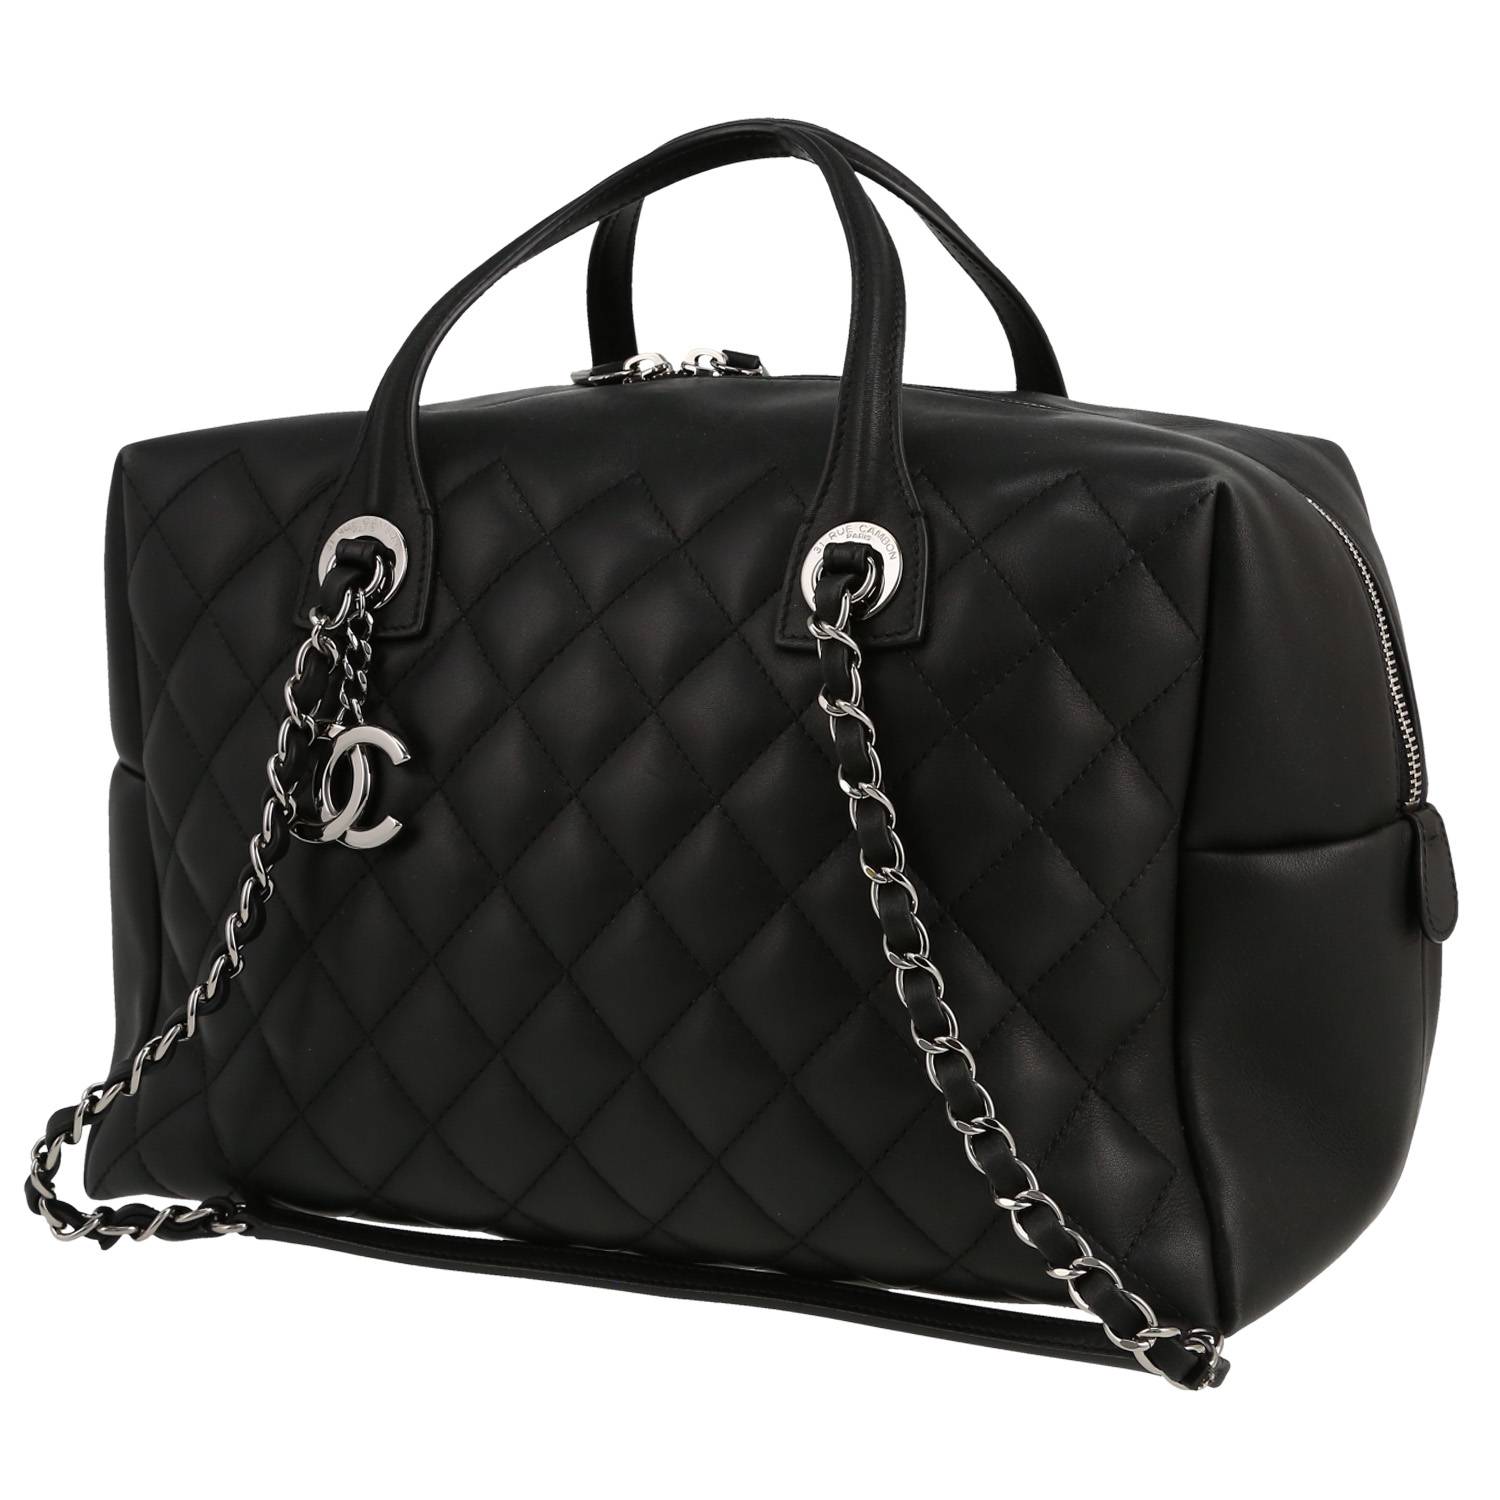 Cambon Handbag In Black Quilted Leather